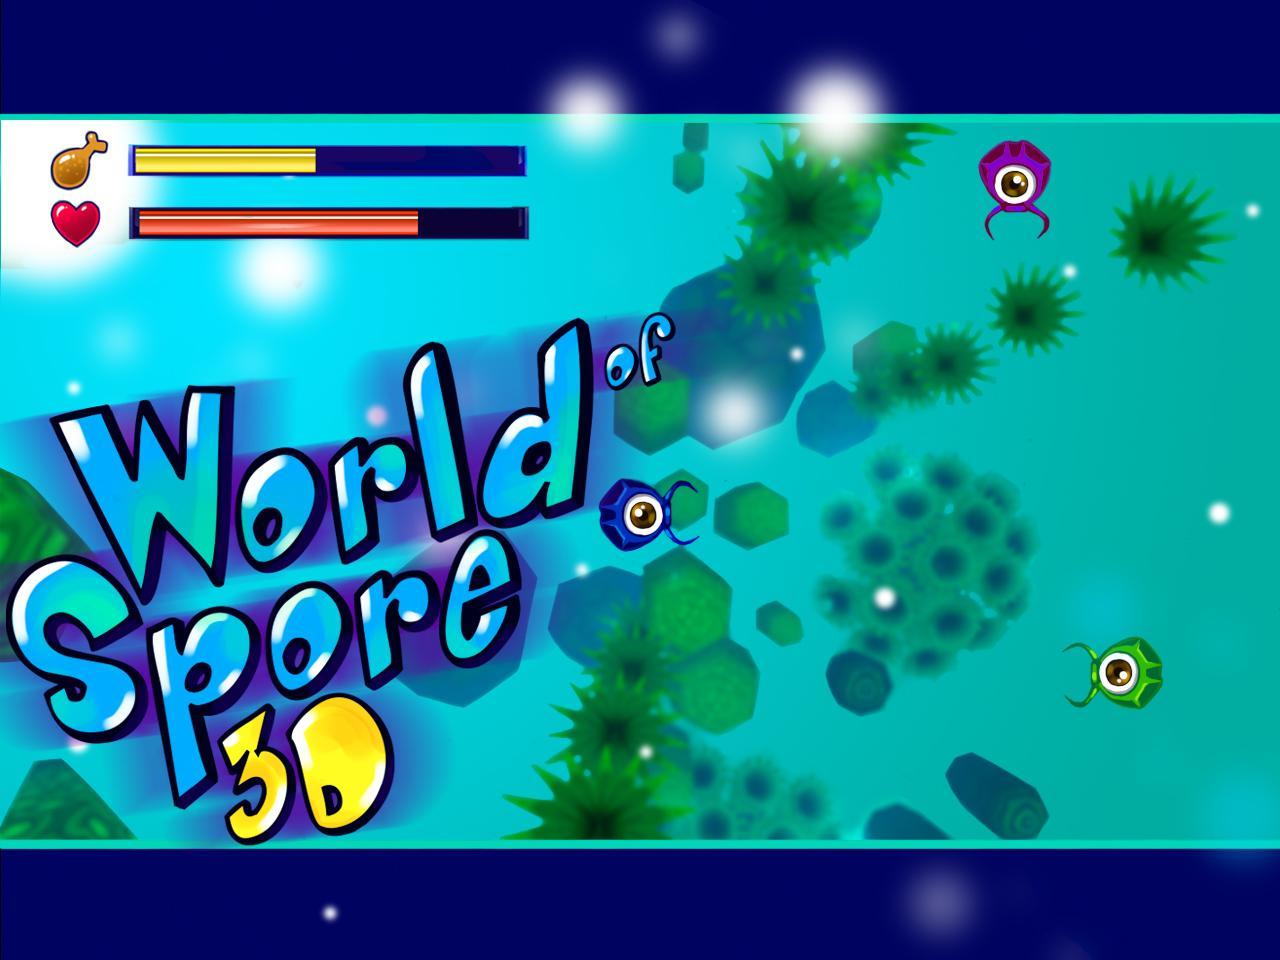 Spore android play store